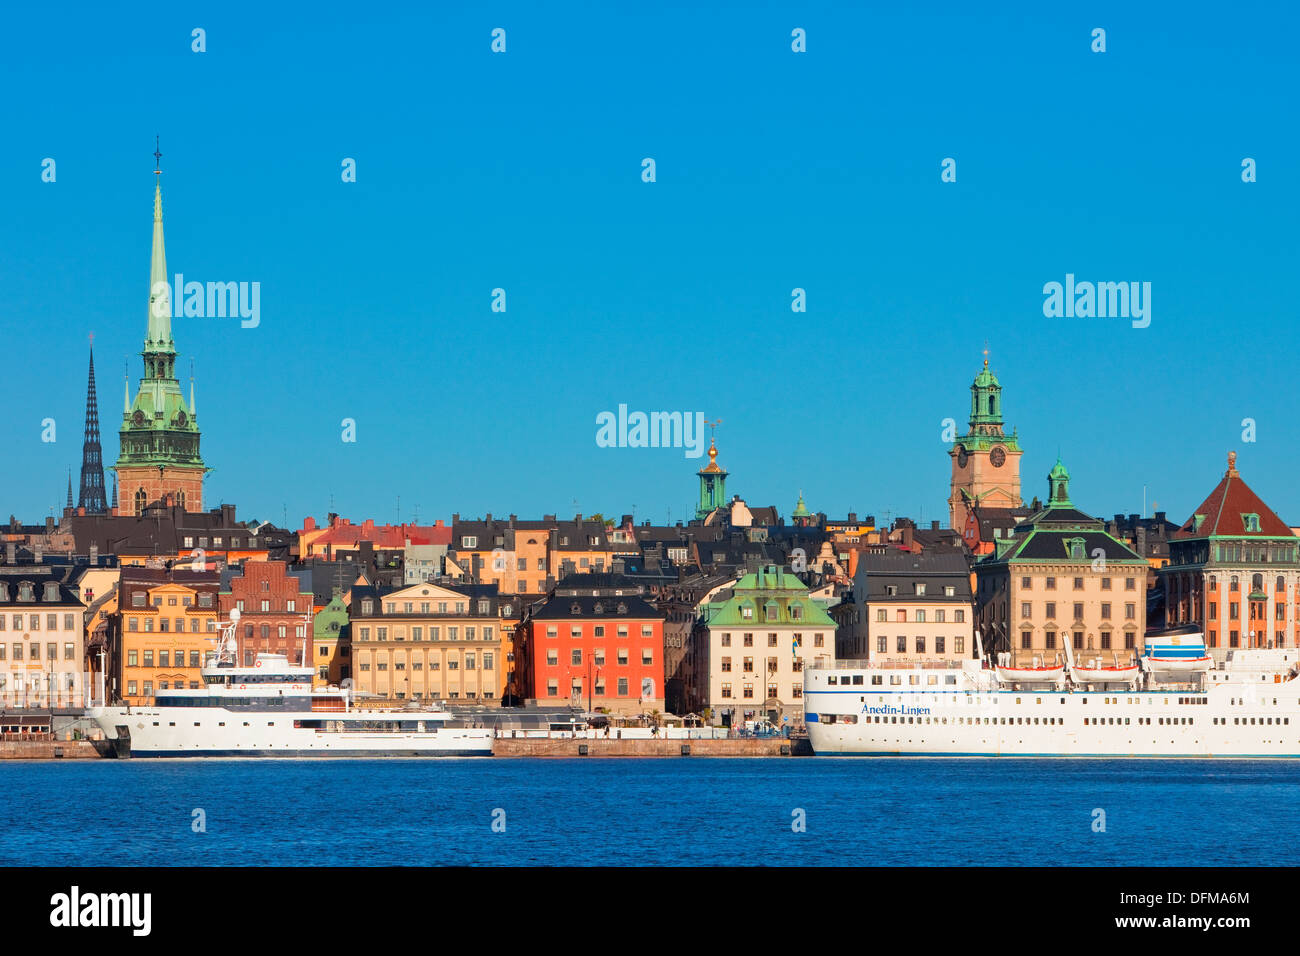 Sweden, Stockholm - The Old Town. Stock Photo